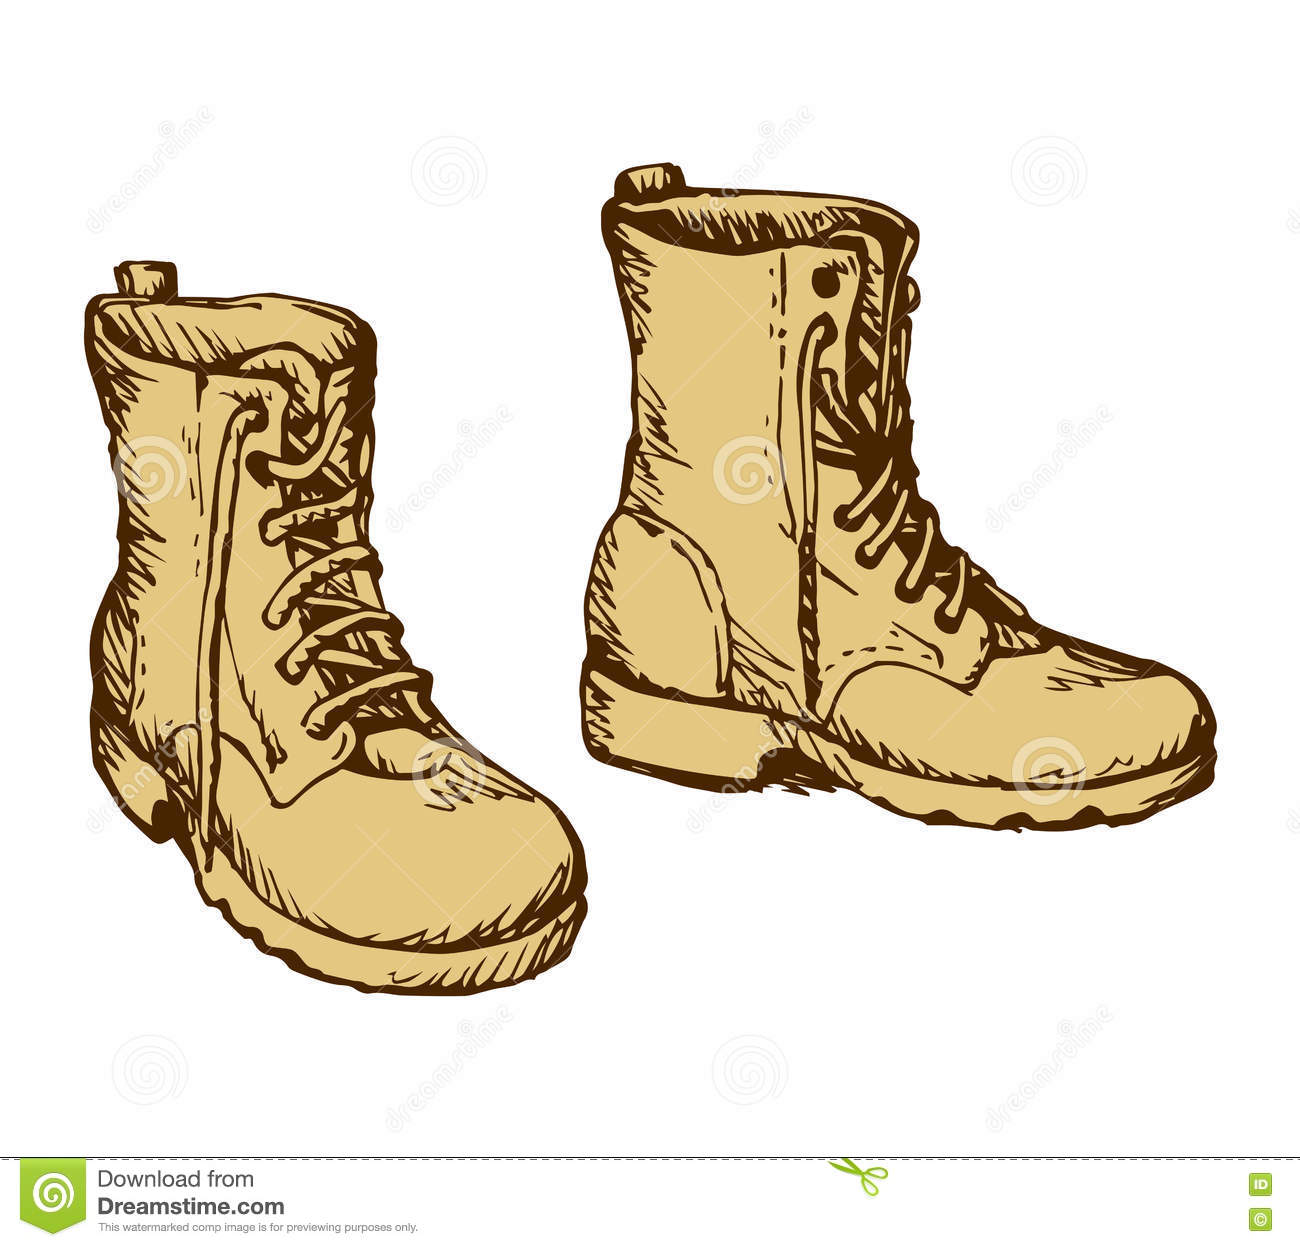 Army boots clipart 6 » Clipart Station.